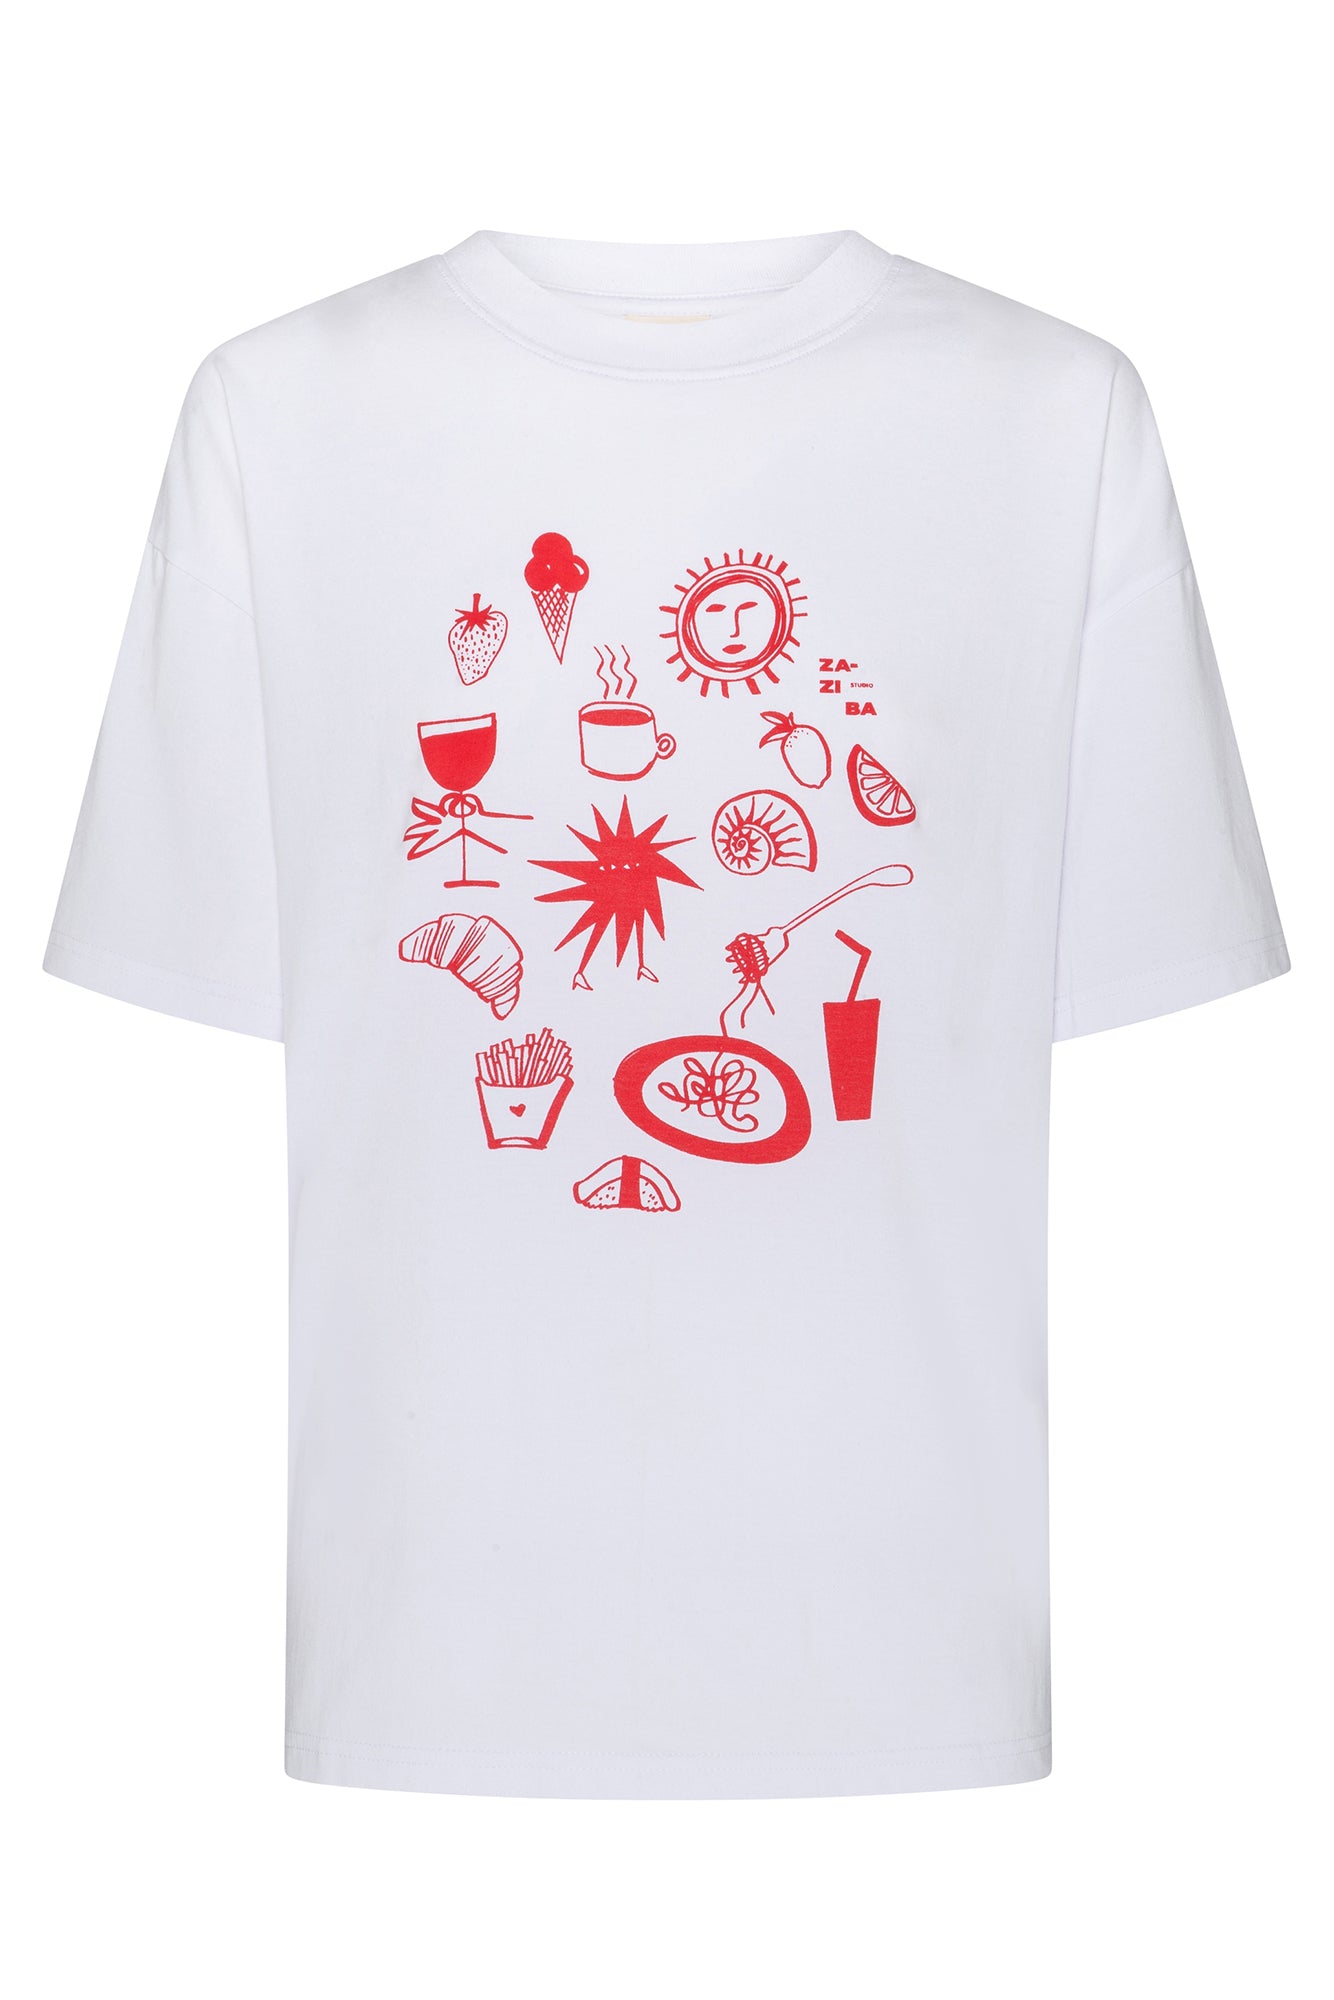 womens cotton white tshirt with red print